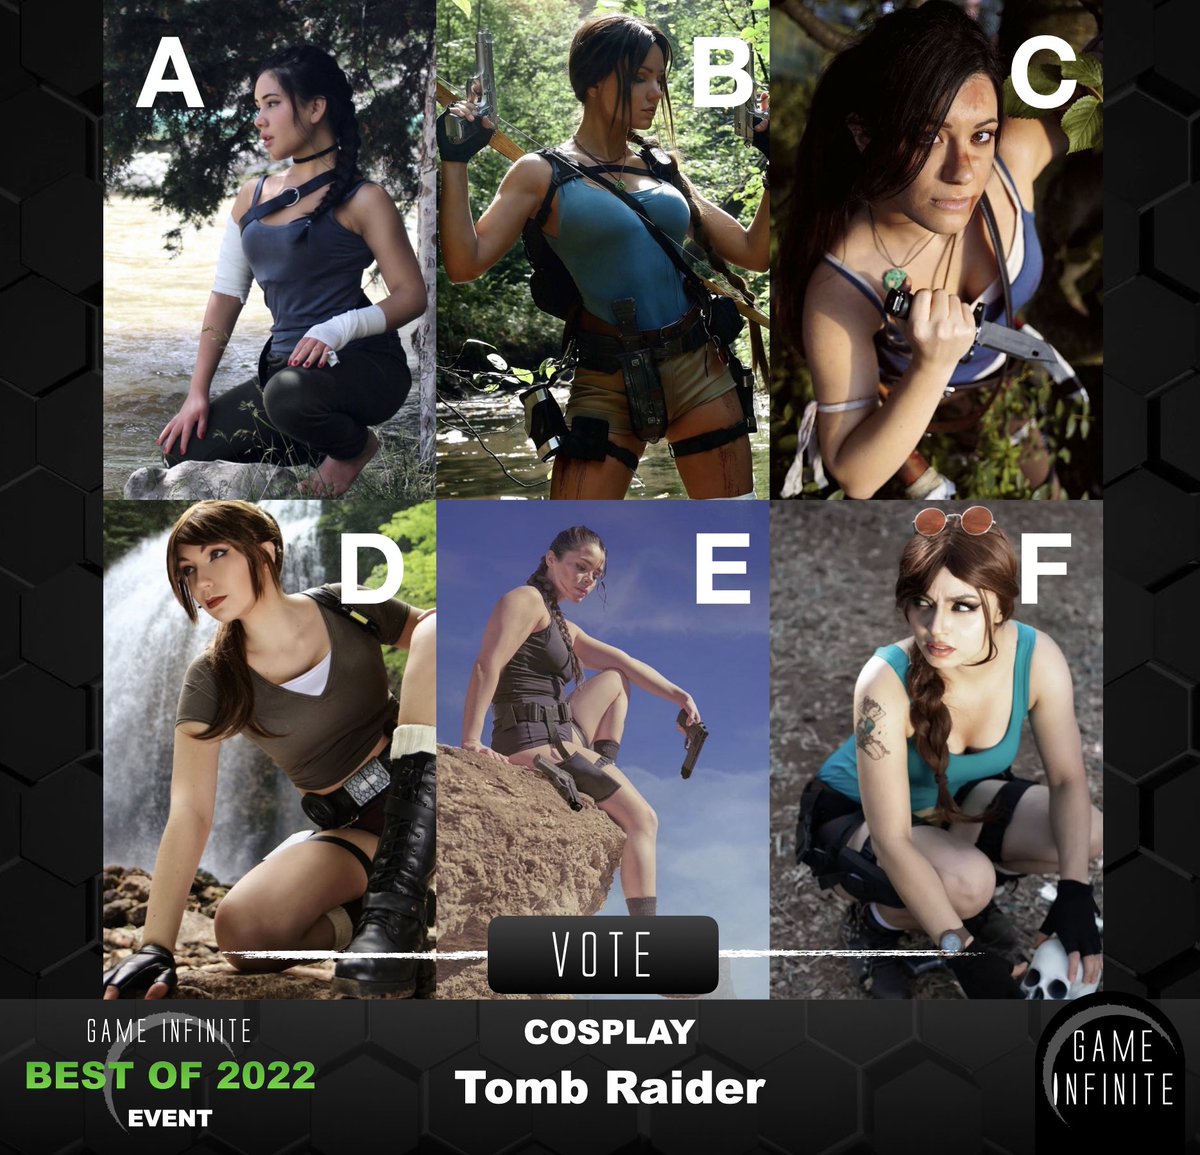 Vote for “Best Tomb Raider Cosplay 2022” in our Best of 2022 Event! Comment below! #tombraider #laracroft #tombraidercosplay #cosplay #cosplayer #laracroftcosplay #bestof2022